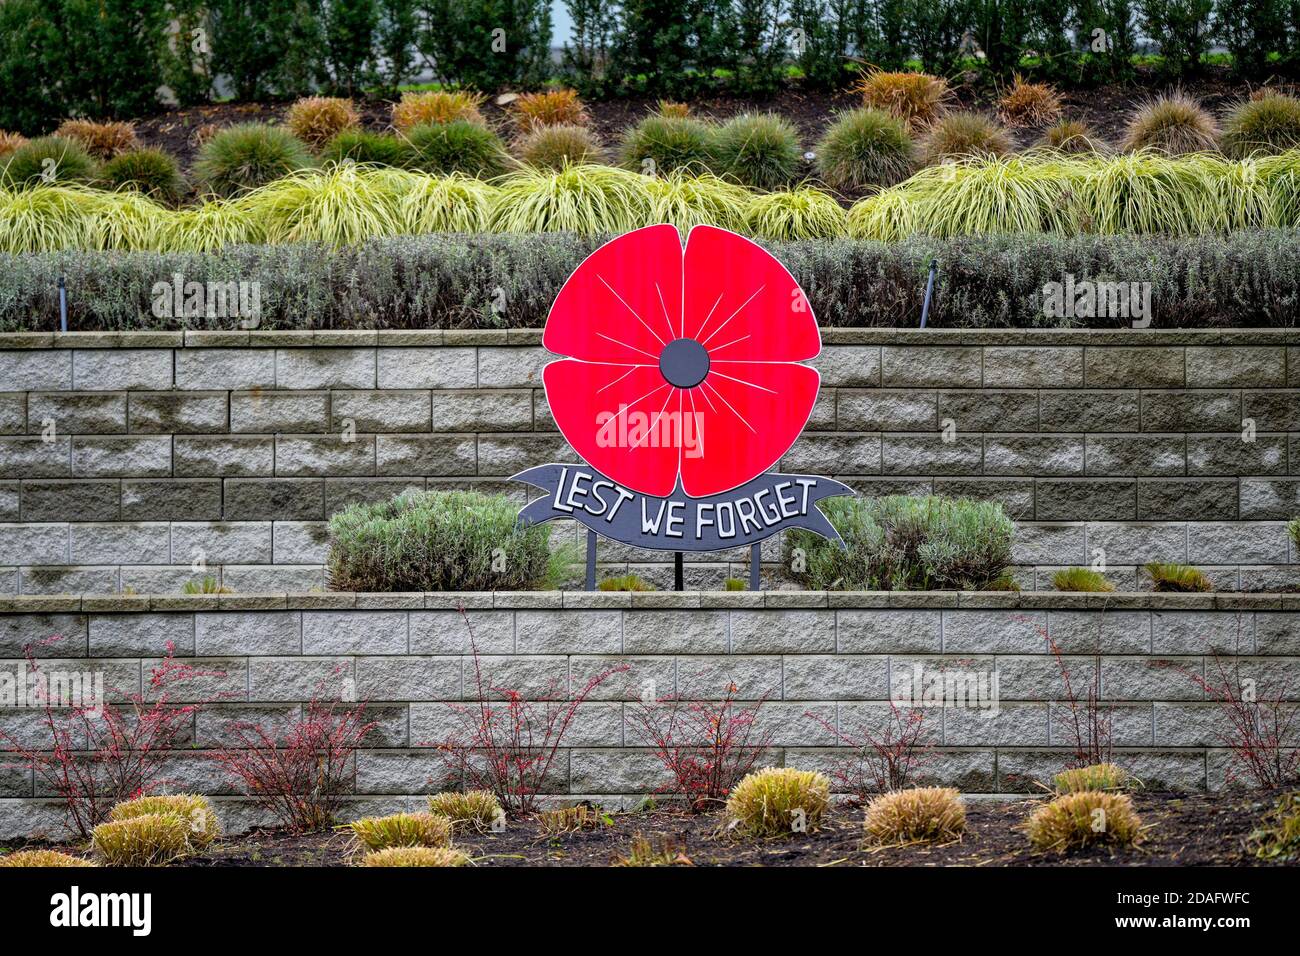 Lest we Forget, Rembrance Day, Poppy installation, Lonsdale Avenue, North Vancouver, British Columbia, Canada Stock Photo